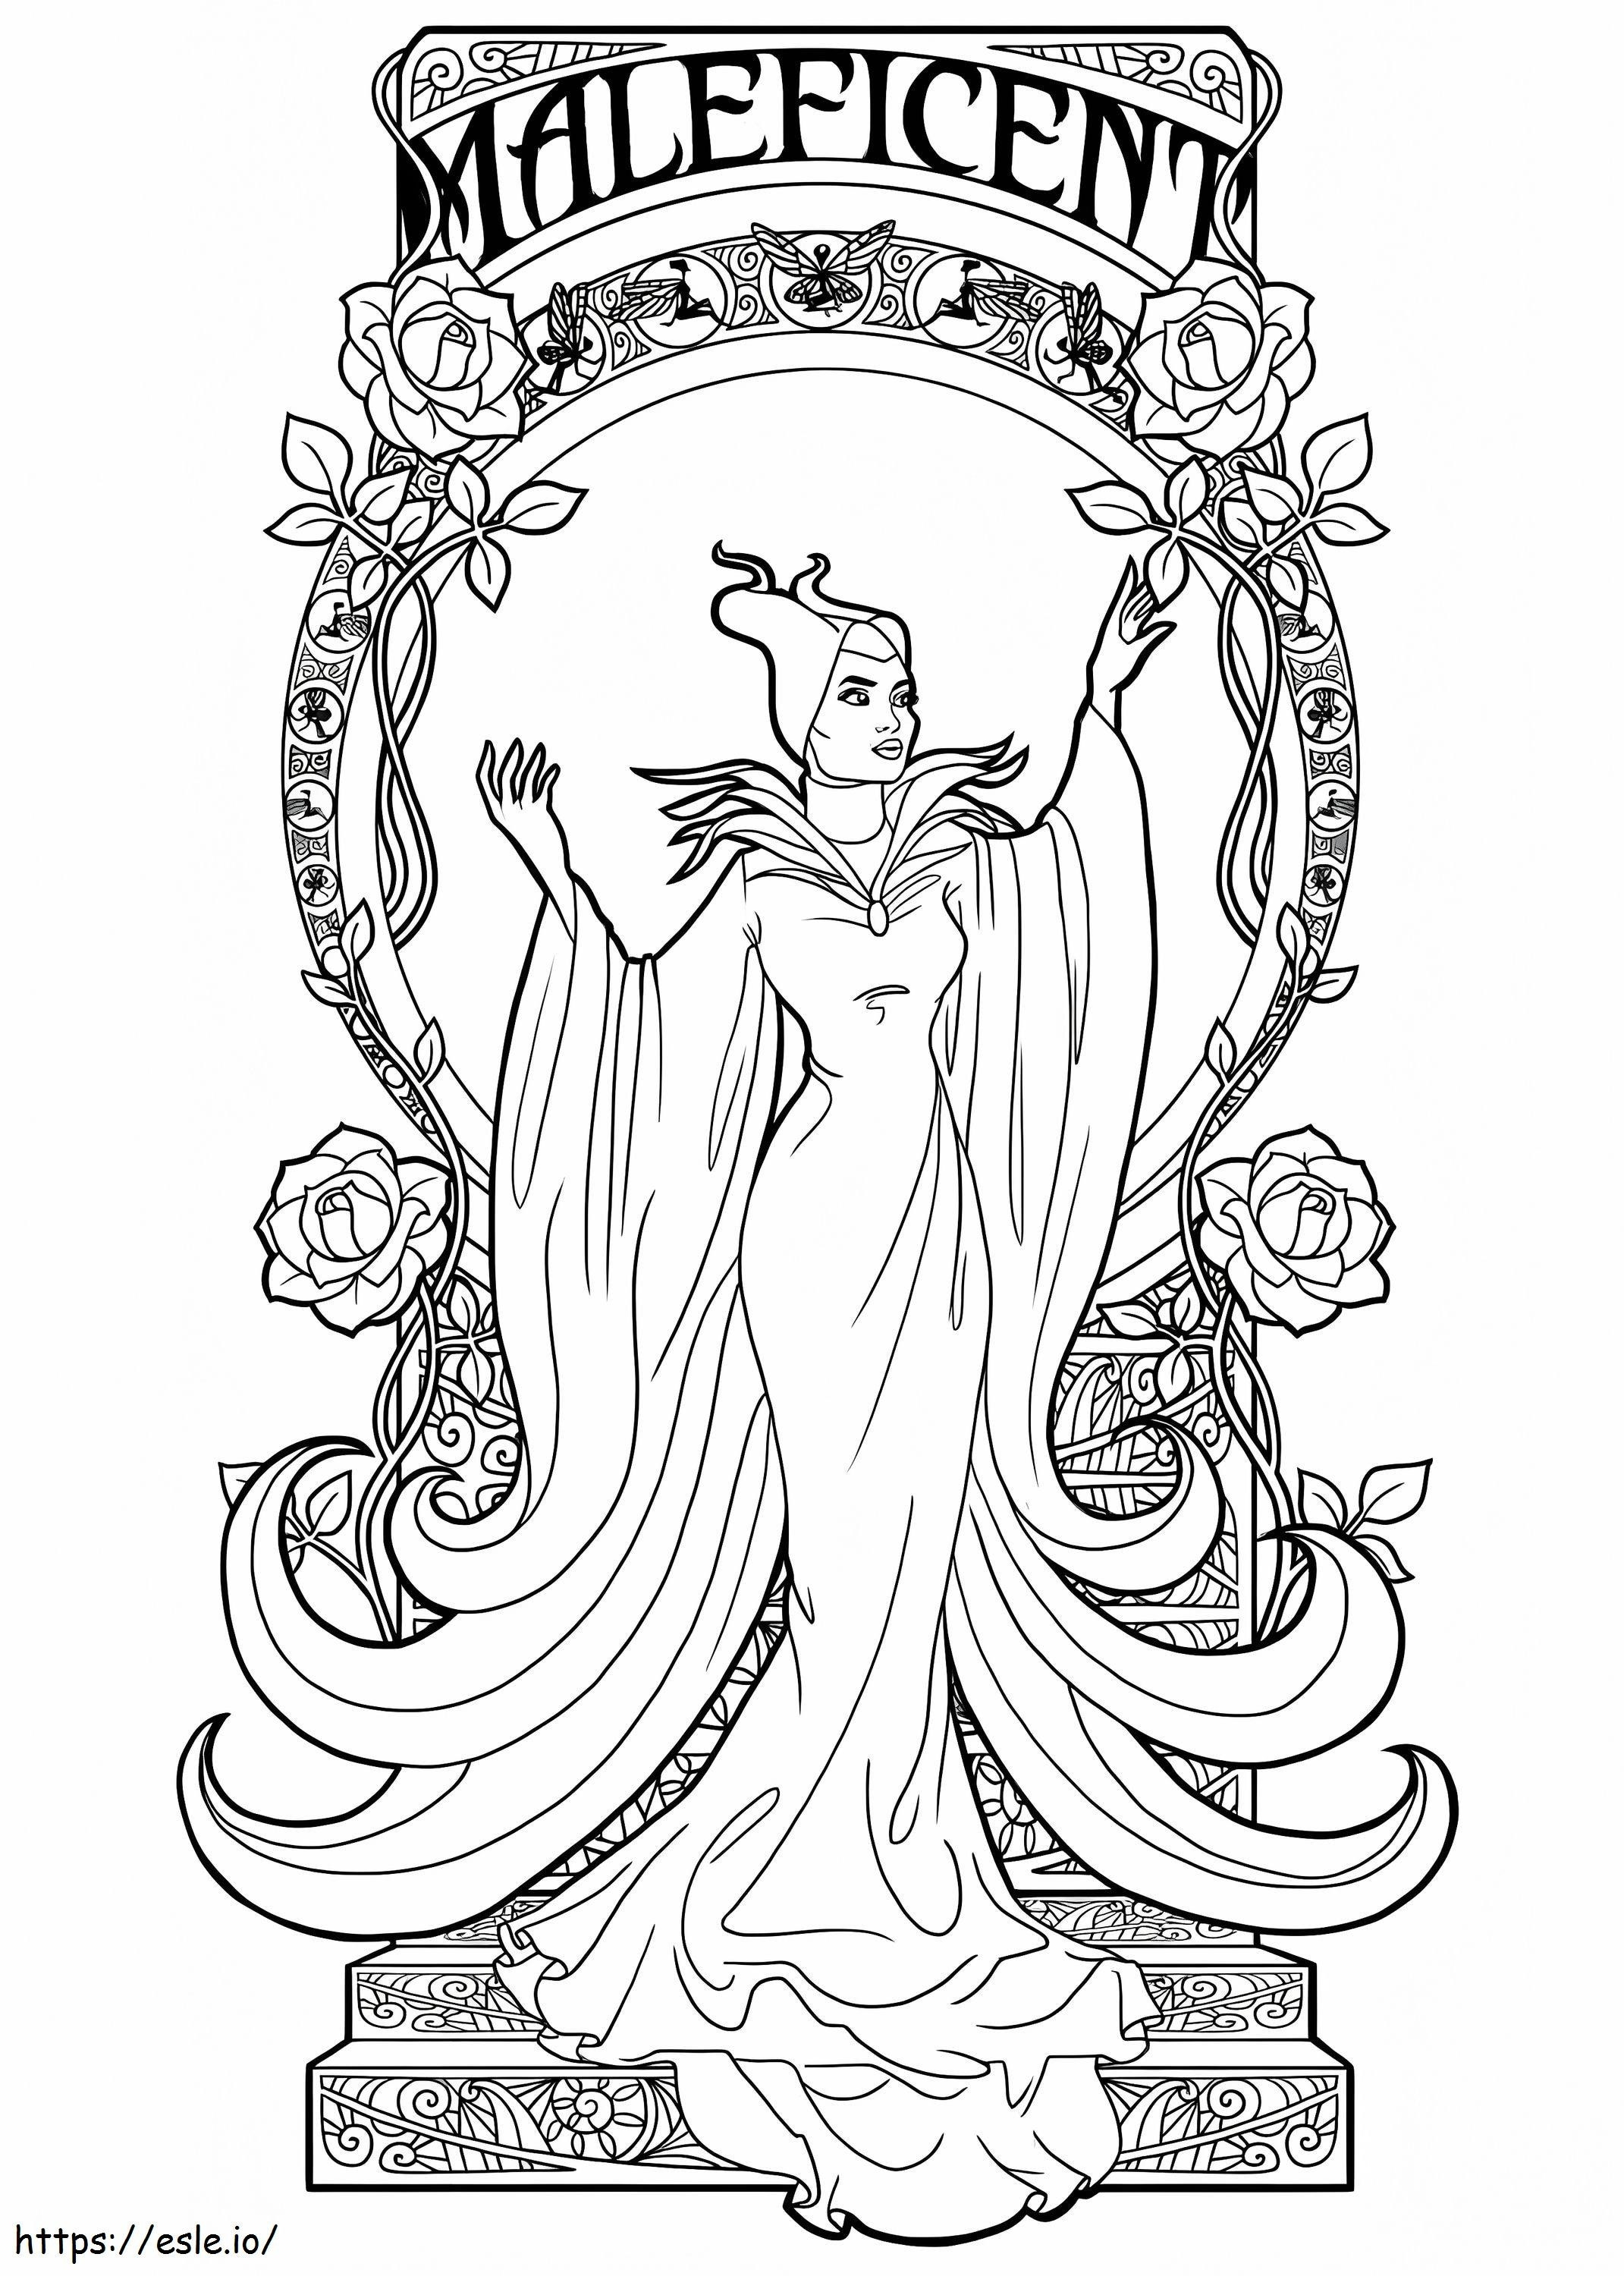 Evil Maleficent coloring page